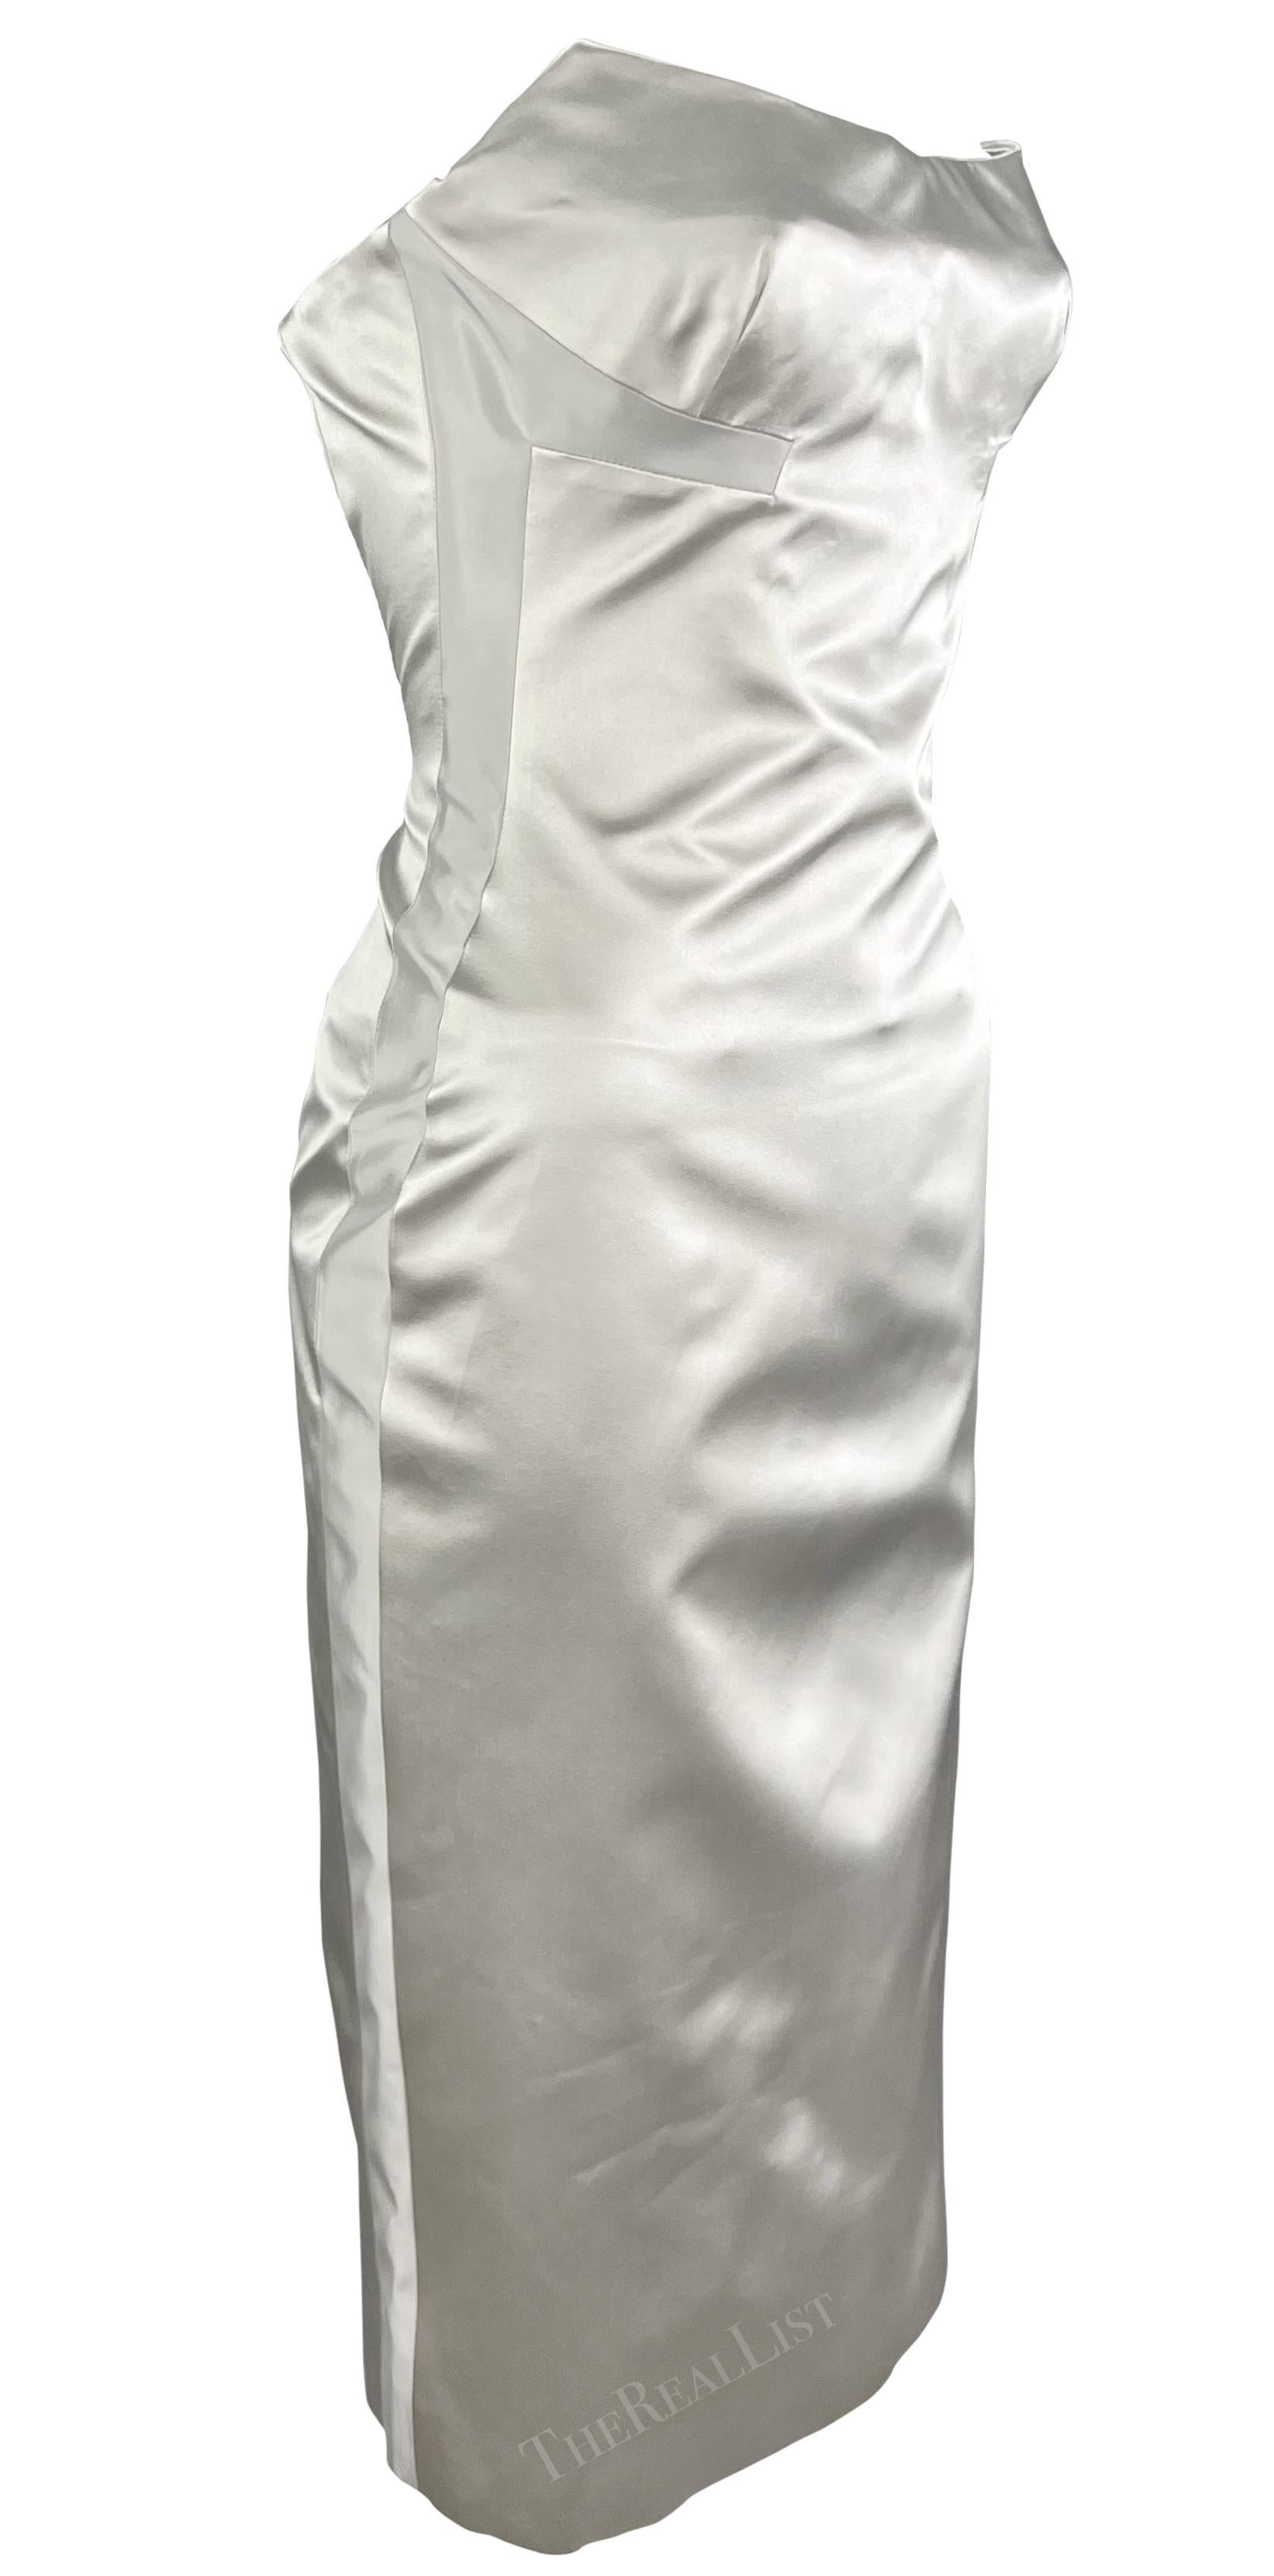 NWT S/S 2001 Gucci by Tom Ford Runway Ad Corset White Silk Satin Strapless Dress For Sale 9